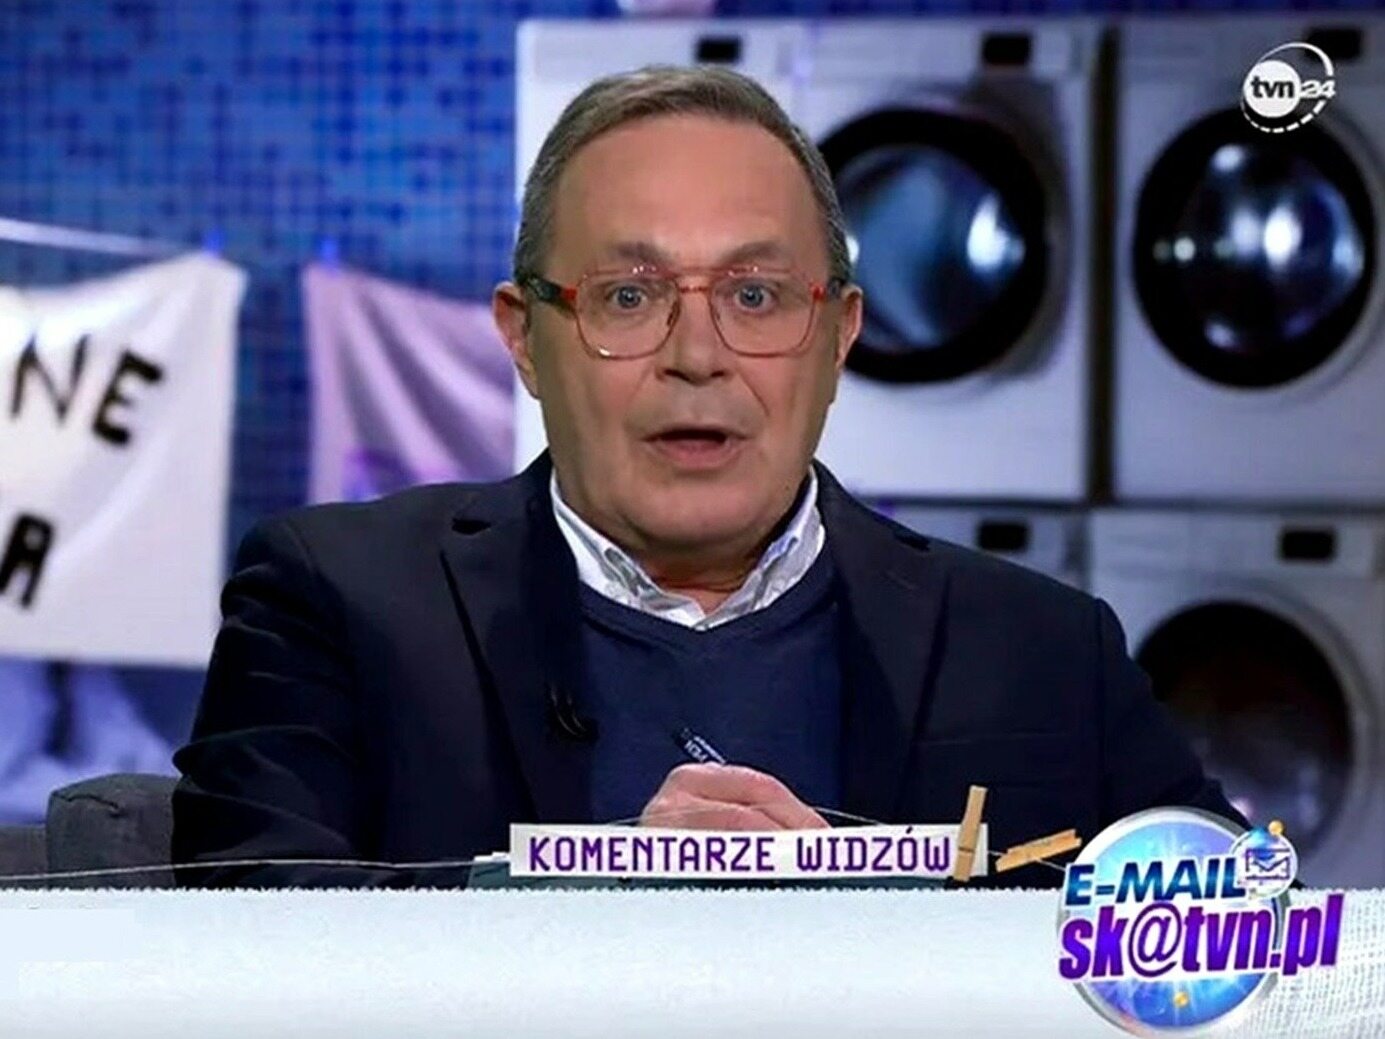 The host of "Contact Lens" exploded on TV.  "Ignorant people will buy it"